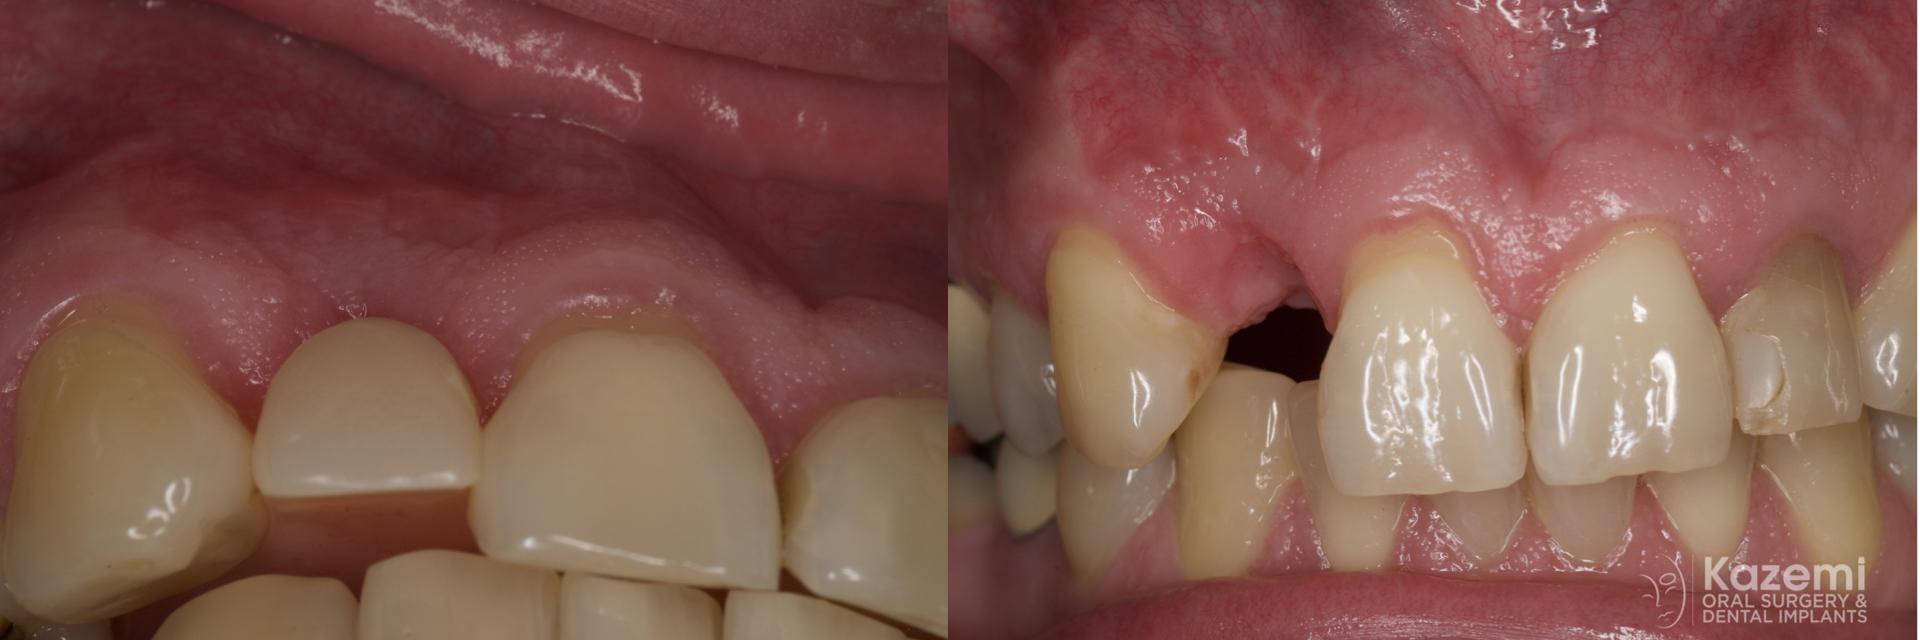 2.-missing-lateral-incisor-gum-recession-kazemi-oral-surgery